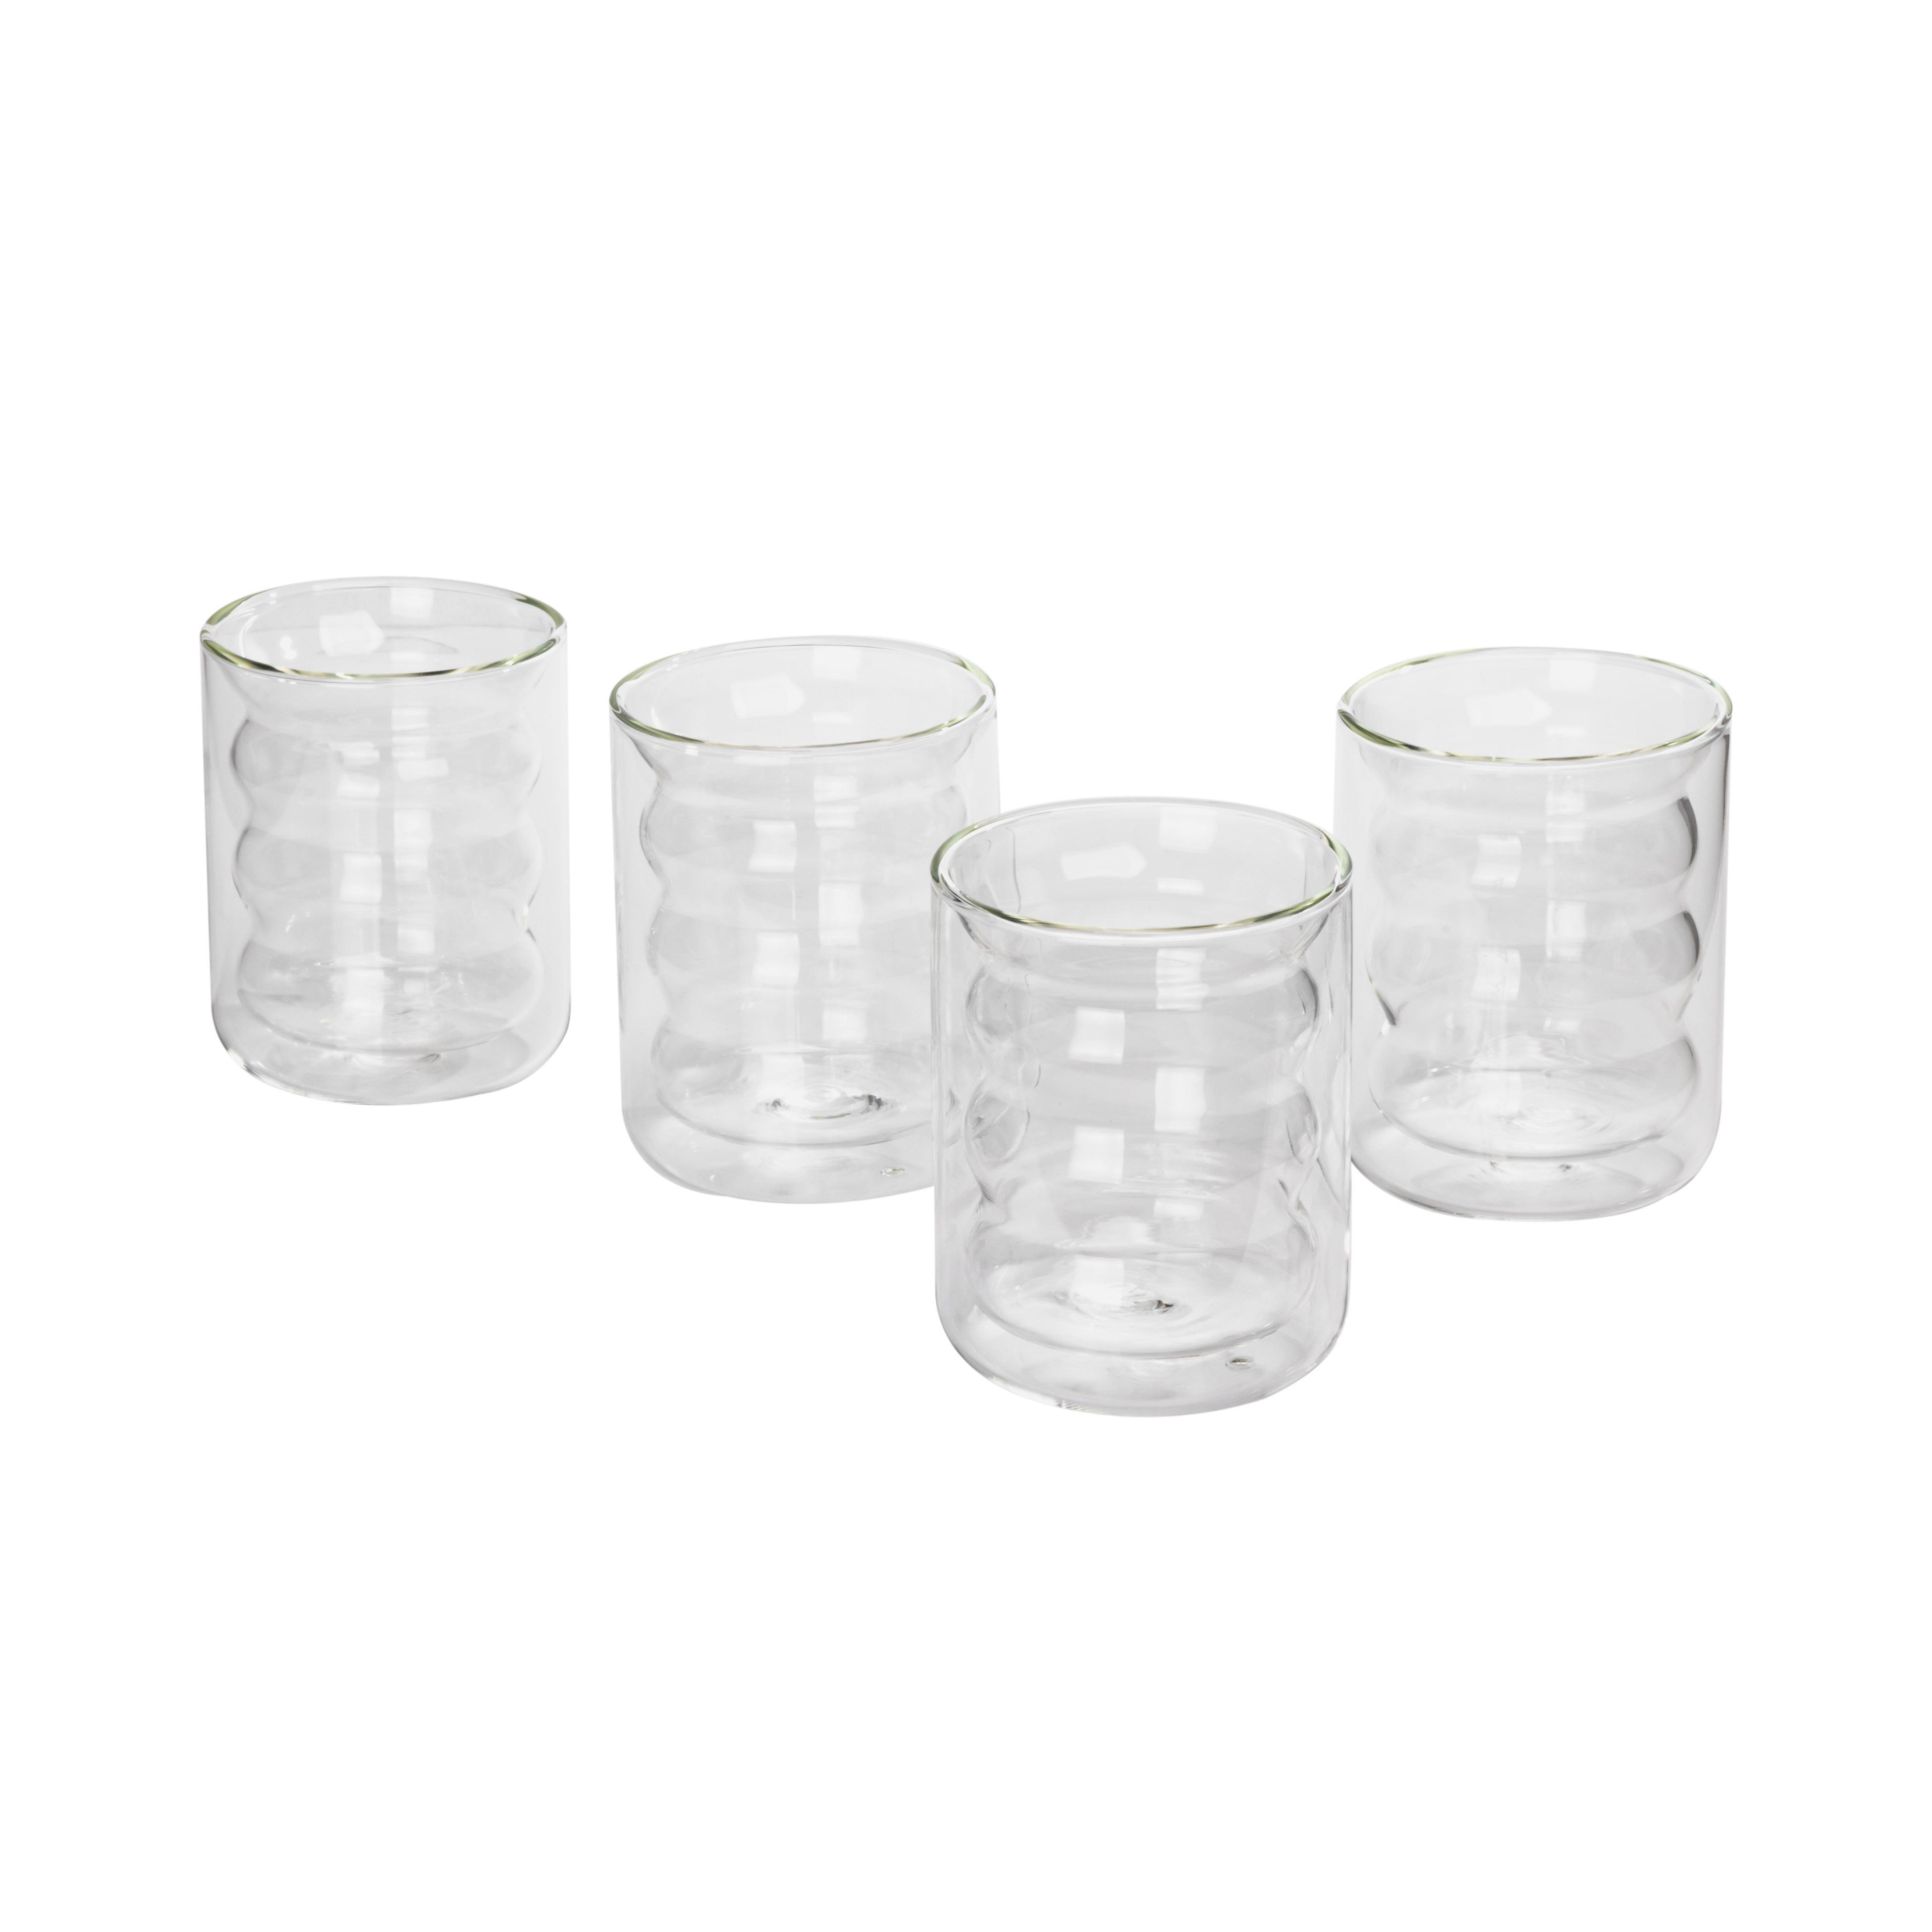 Waves Clear Water Glass - Set of 4 - Image 2